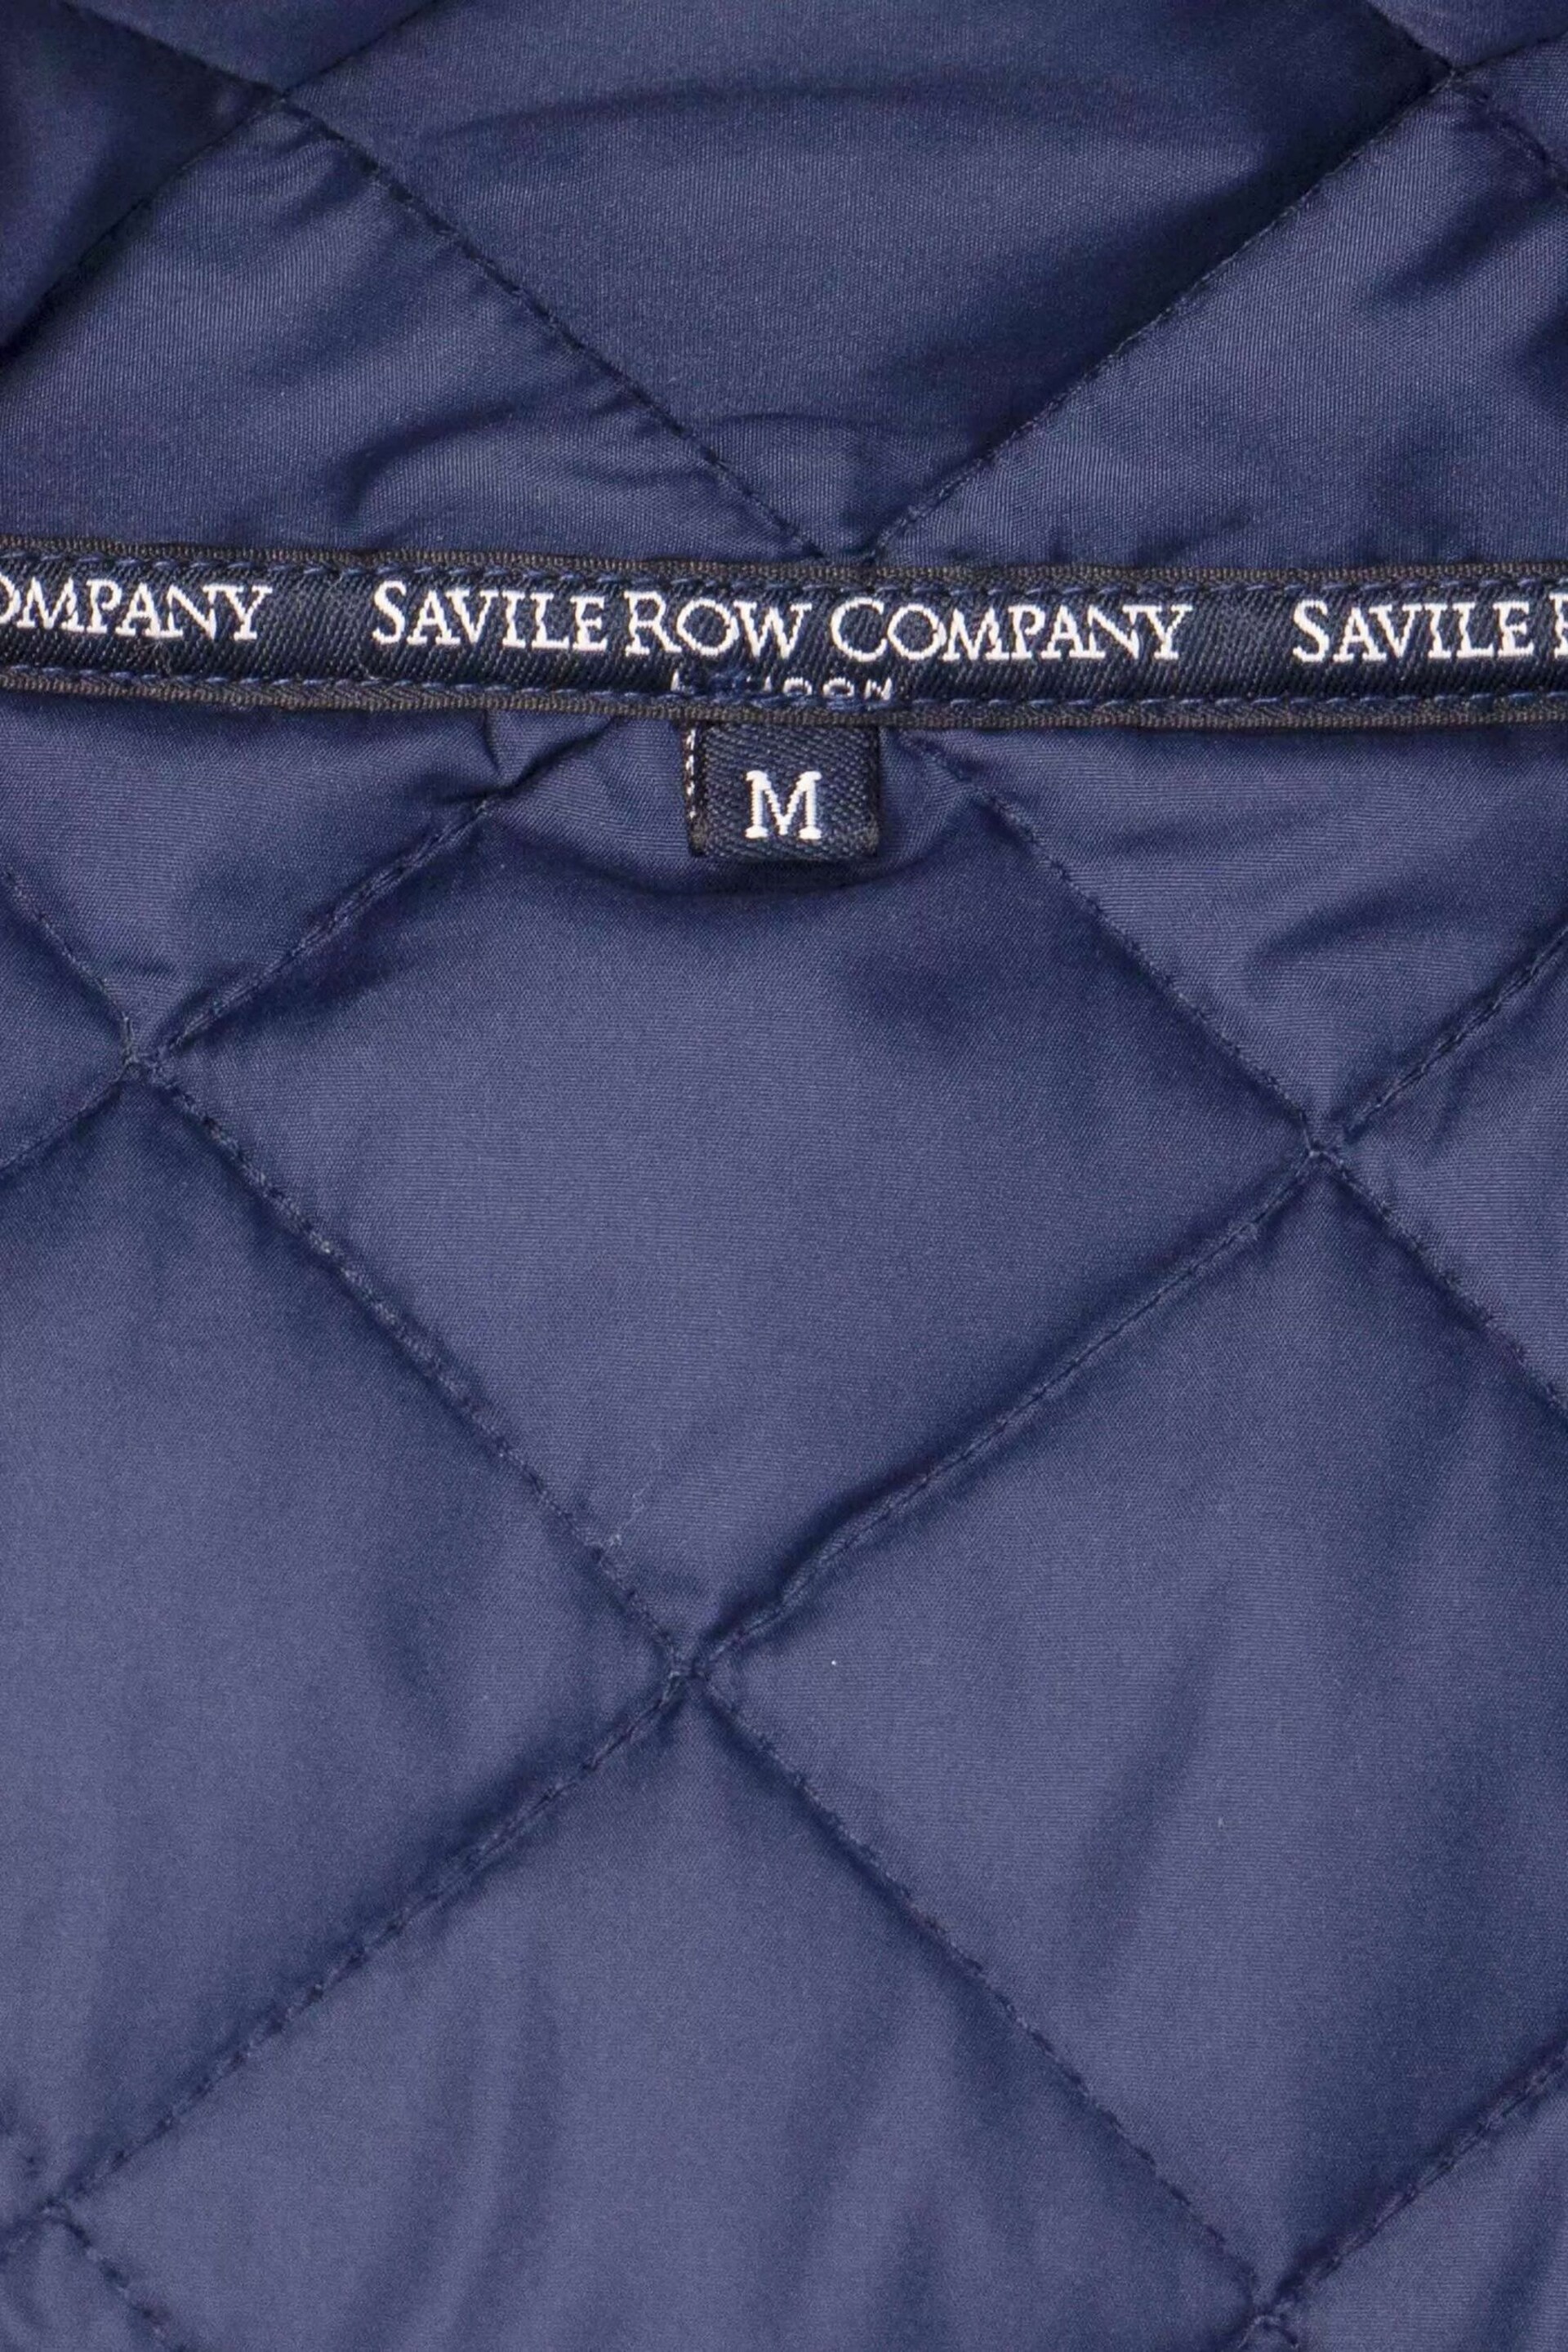 Savile Row Company Navy Blue Quilted Gilet - Image 5 of 5